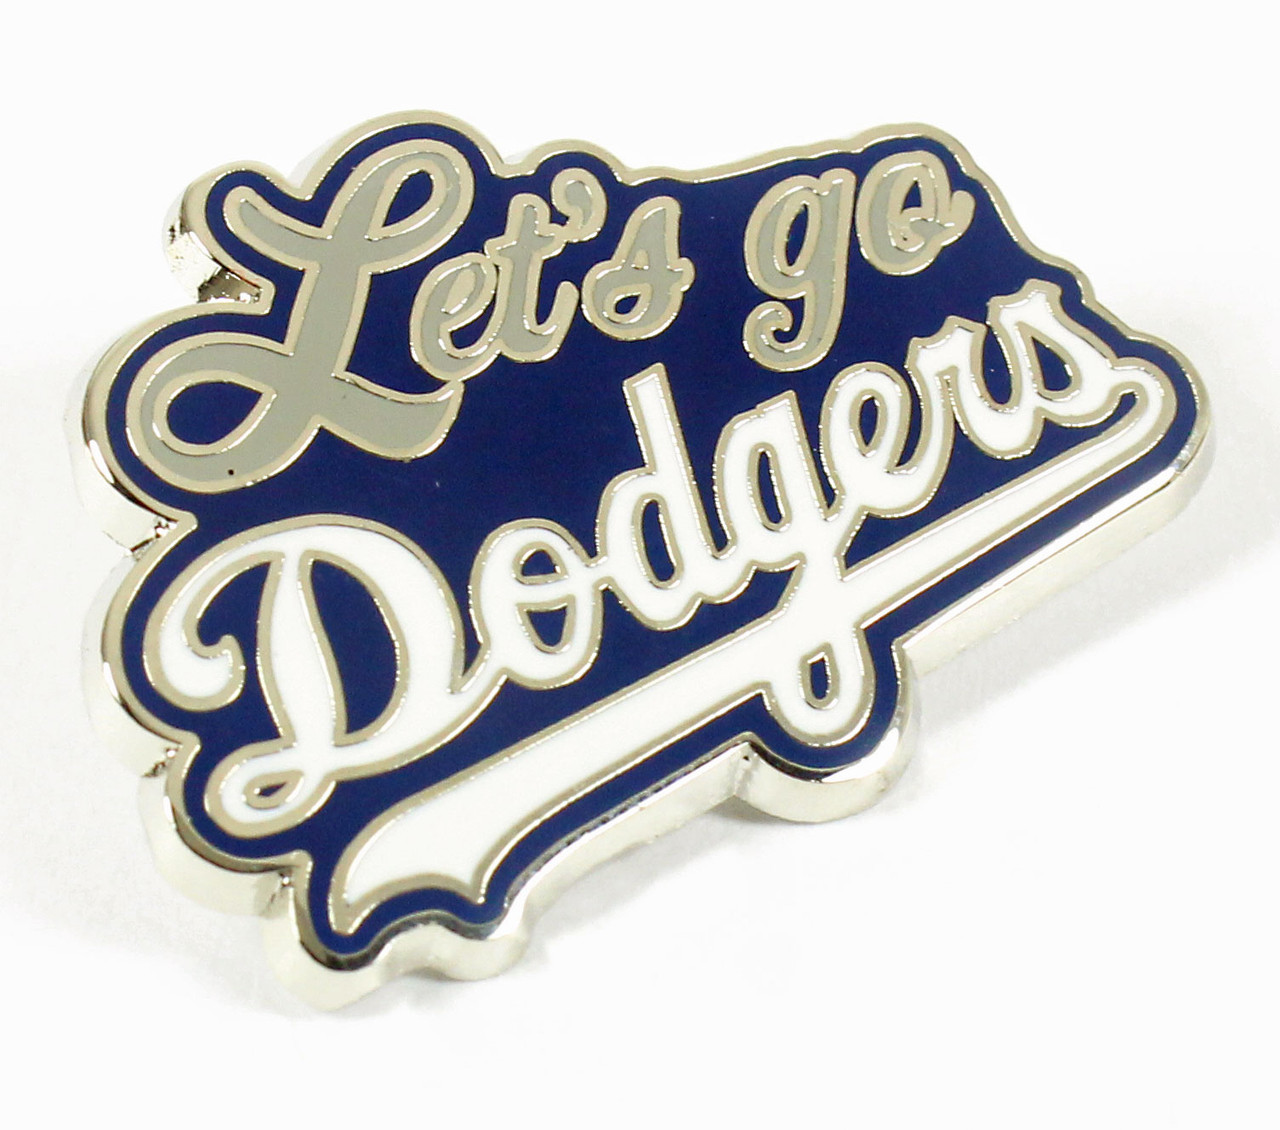 Official Los Angeles Dodgers Collectible Patches, Pins, Dodgers Patches,  Pin Sets